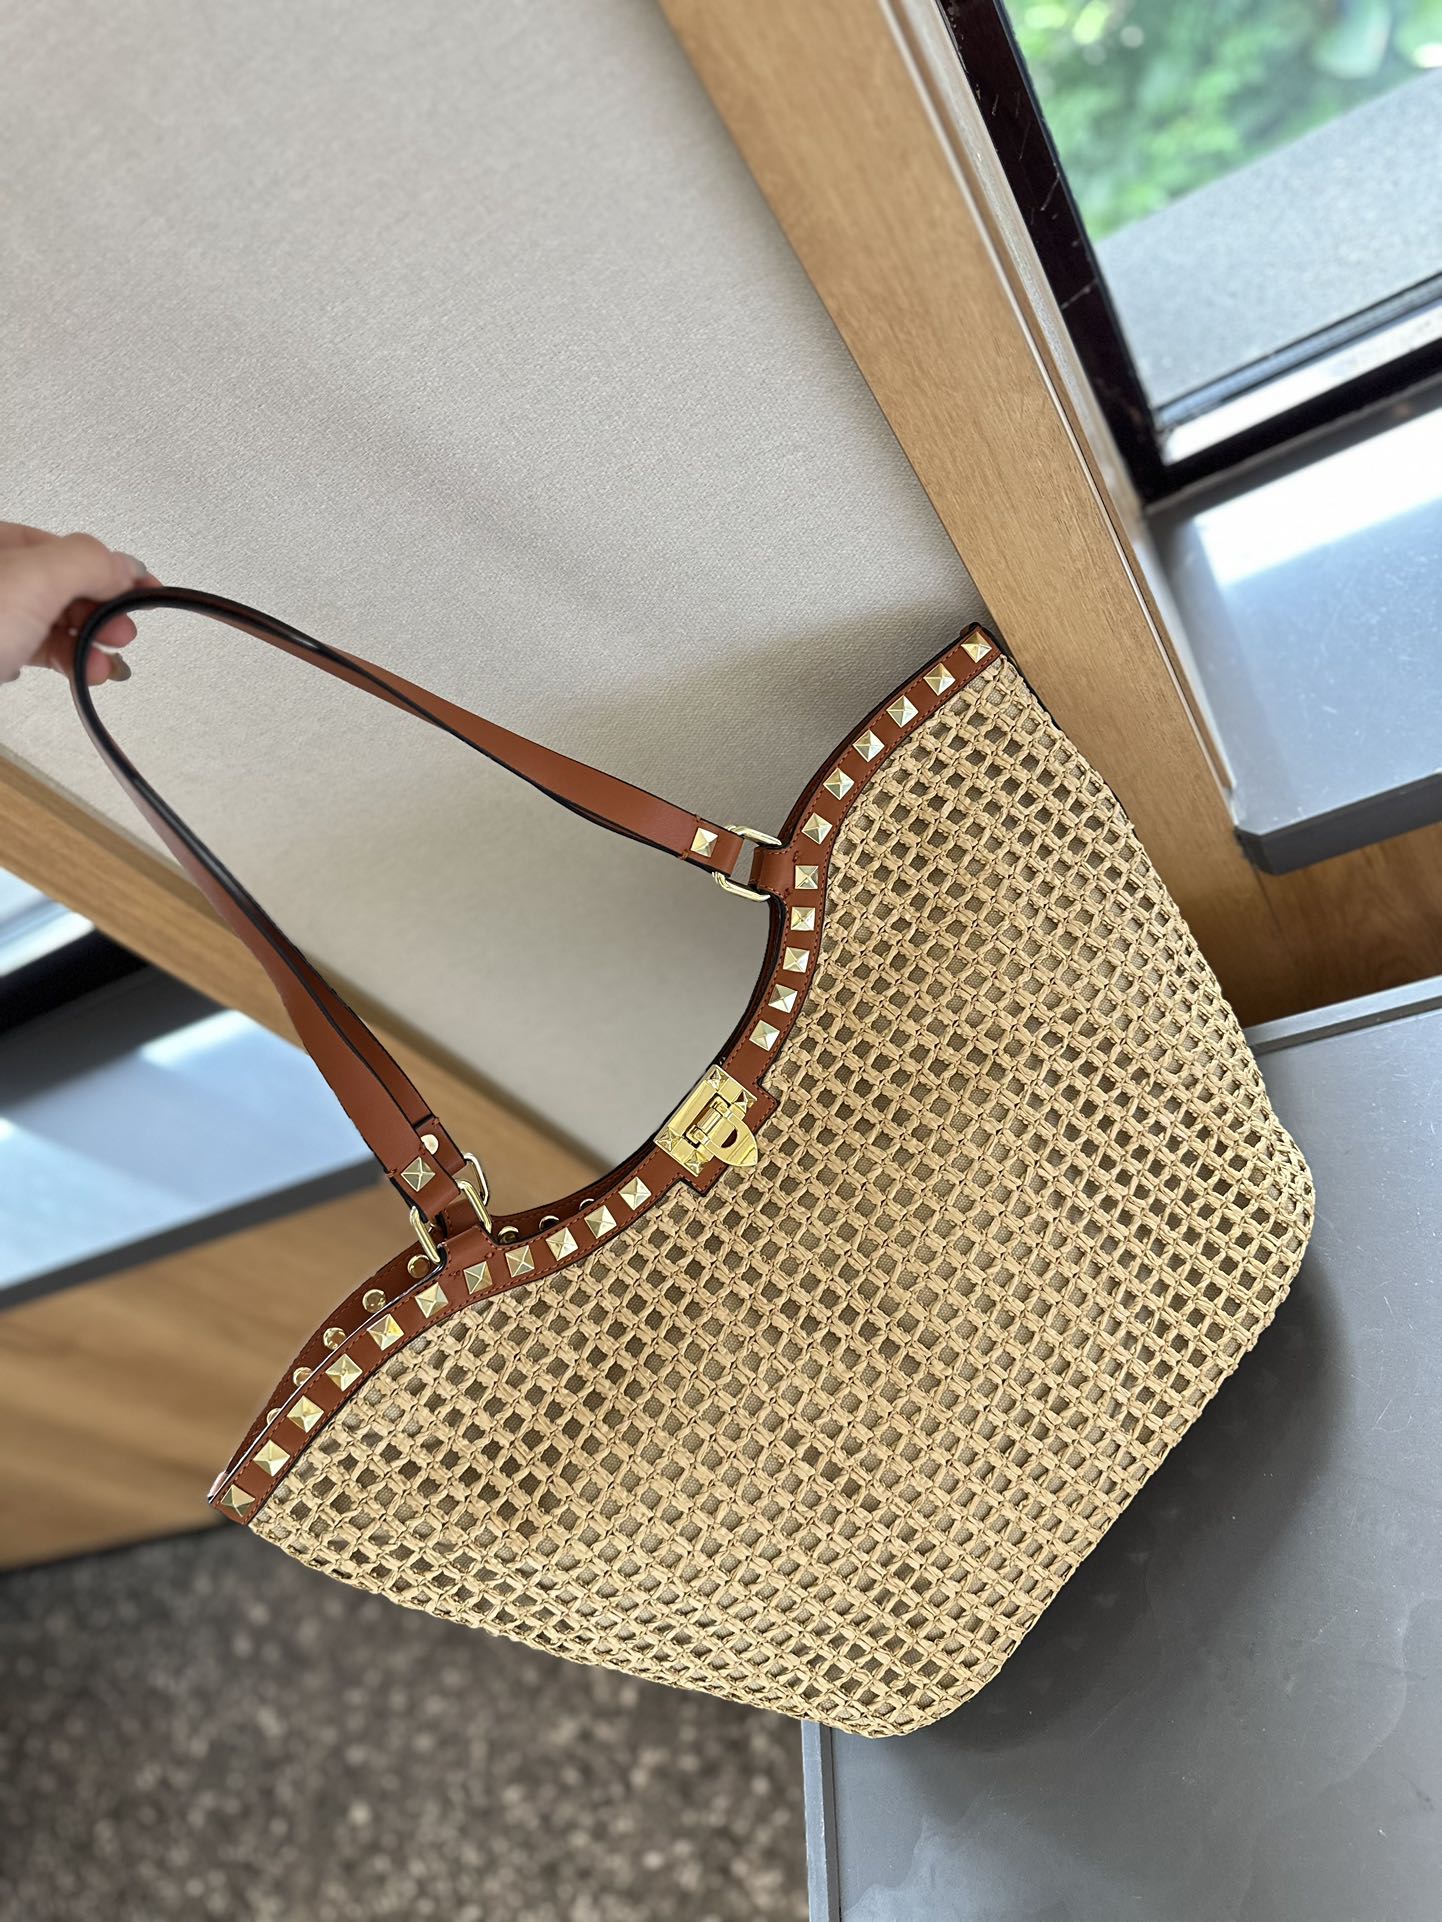 Supplier in China
 Valentino New
 Bags Handbags Rivets Raffia Straw Woven Weave Summer Collection